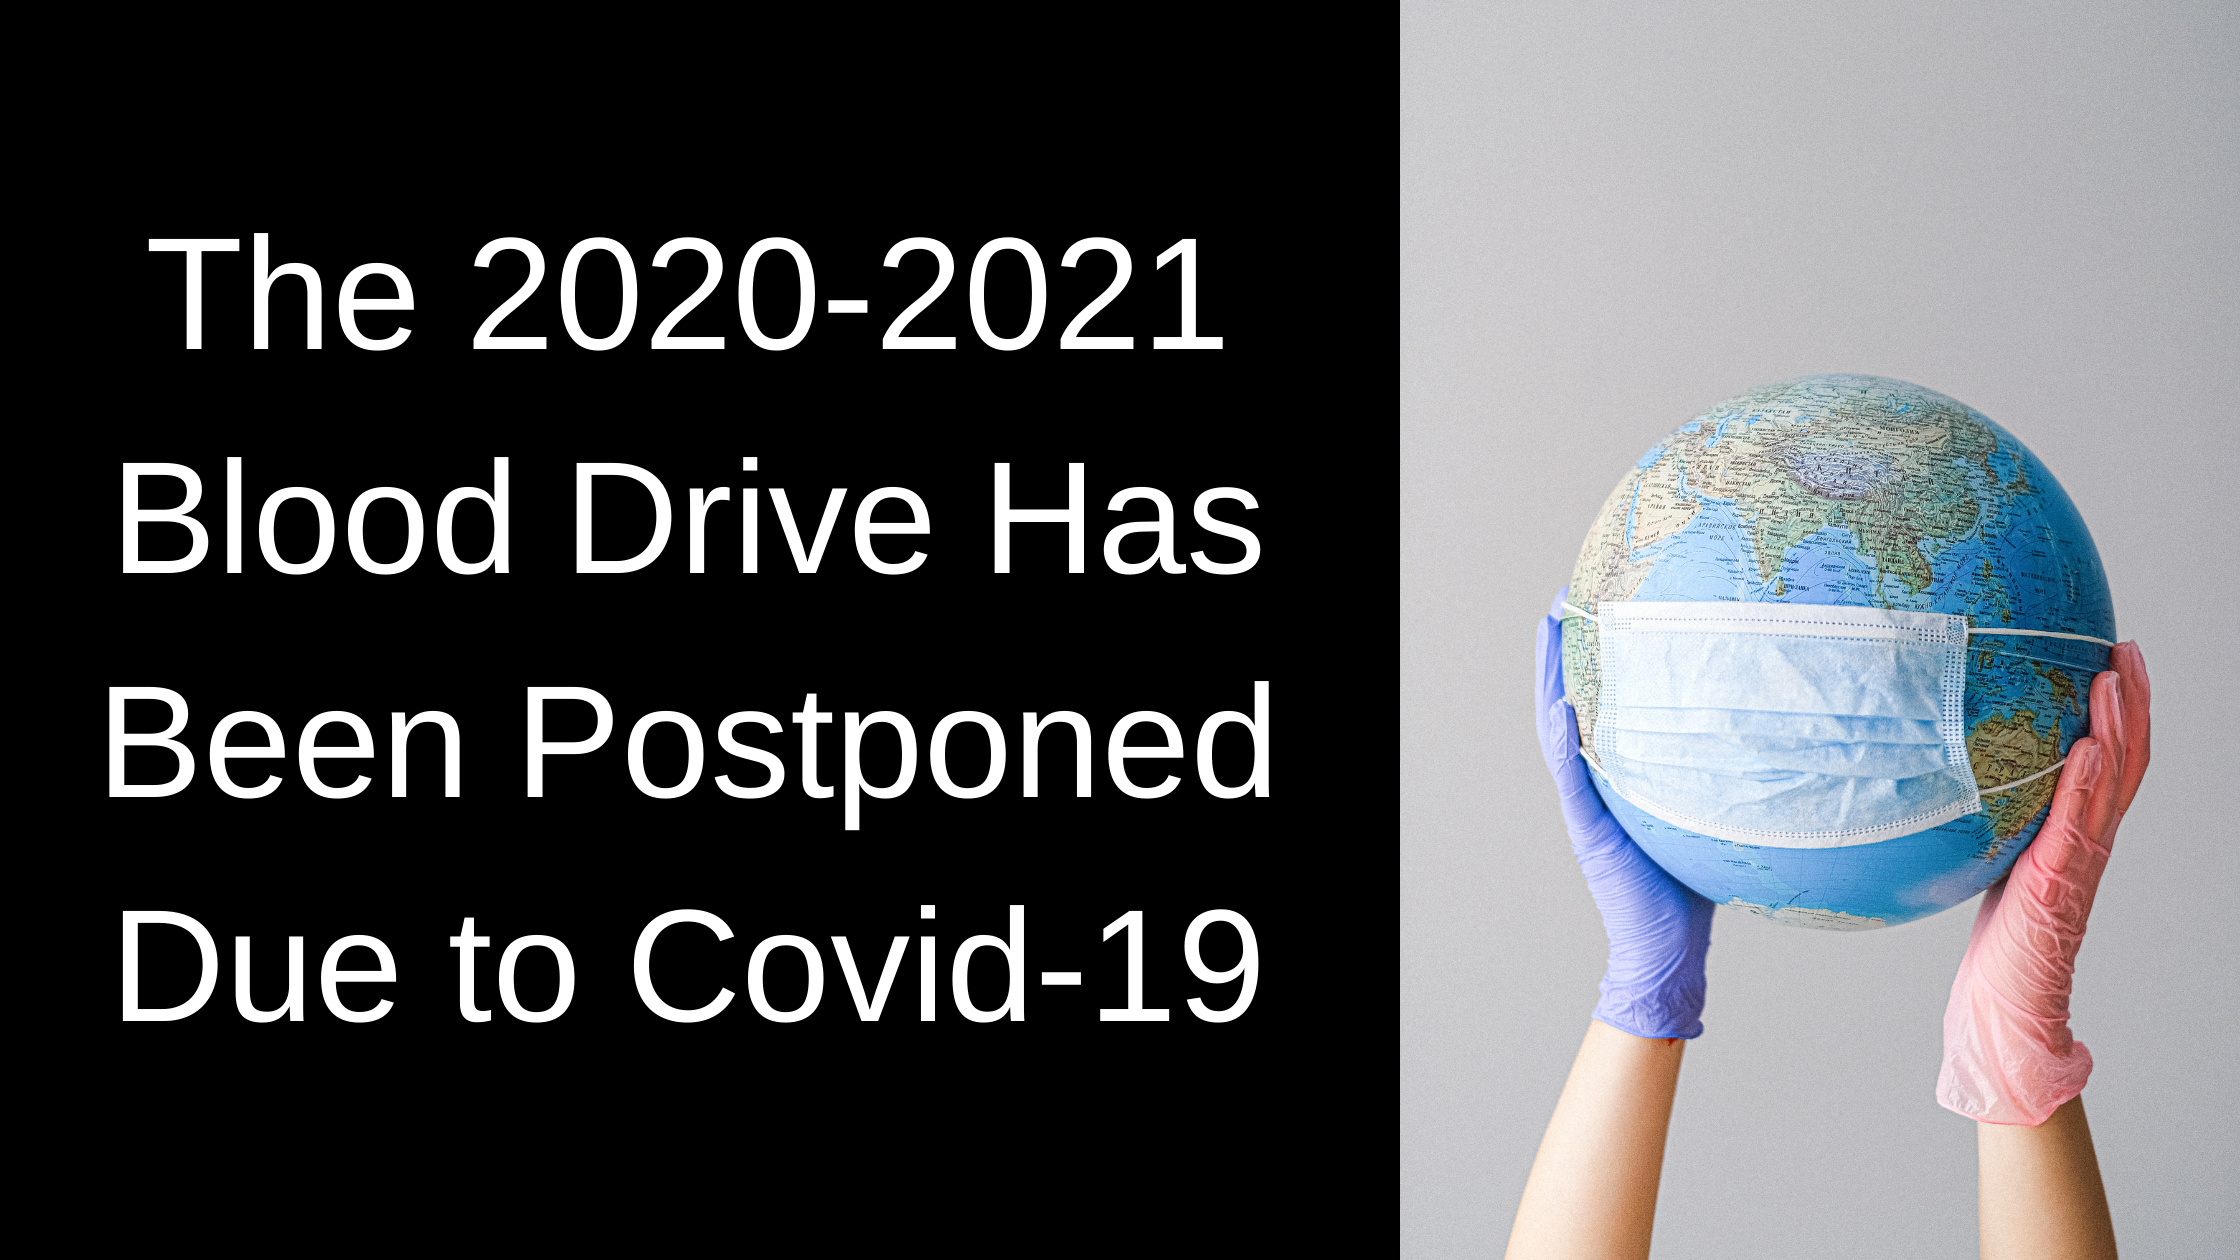 The 2020-2021 Blood Drive has been Postponed due to covid-19